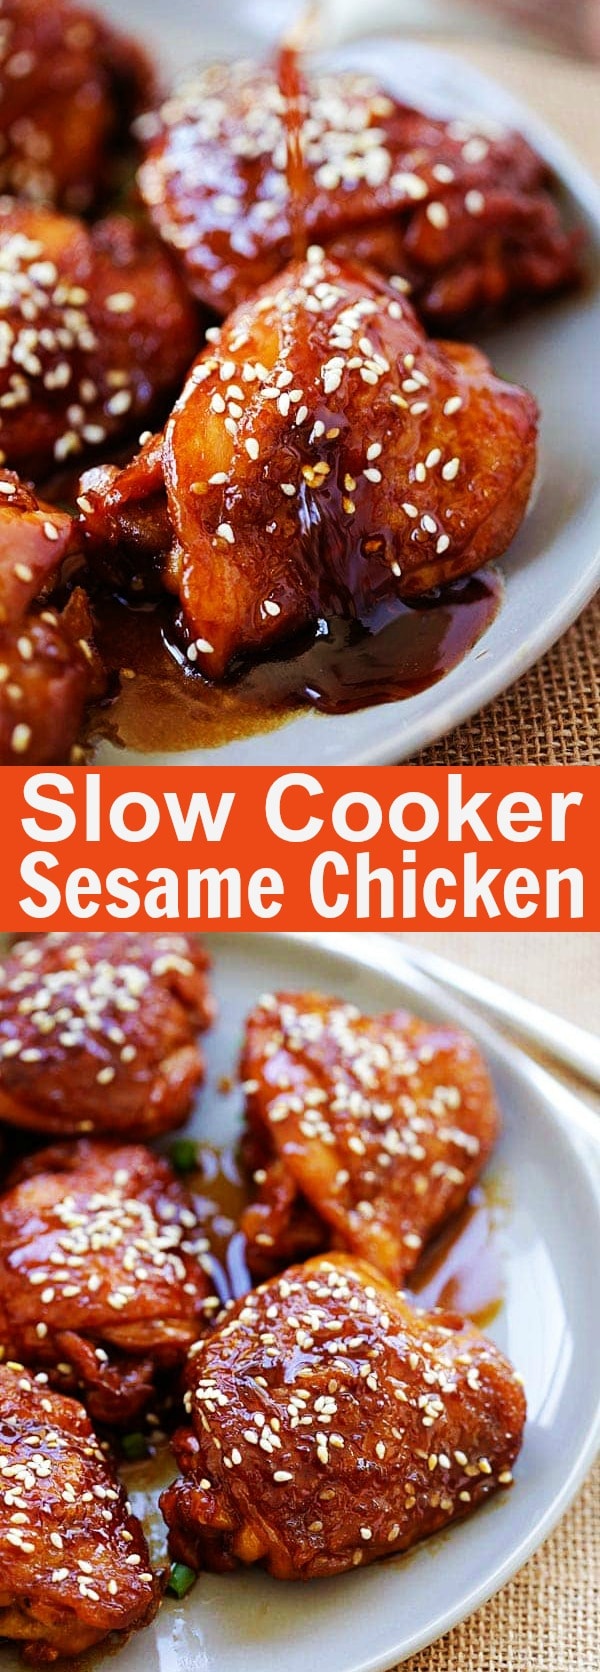 Slow Cooker Sesame Chicken – amazing chicken made with San-J Tamari and sesame sauce. Gluten-free and hearty meal for the family | rasamalaysia.com